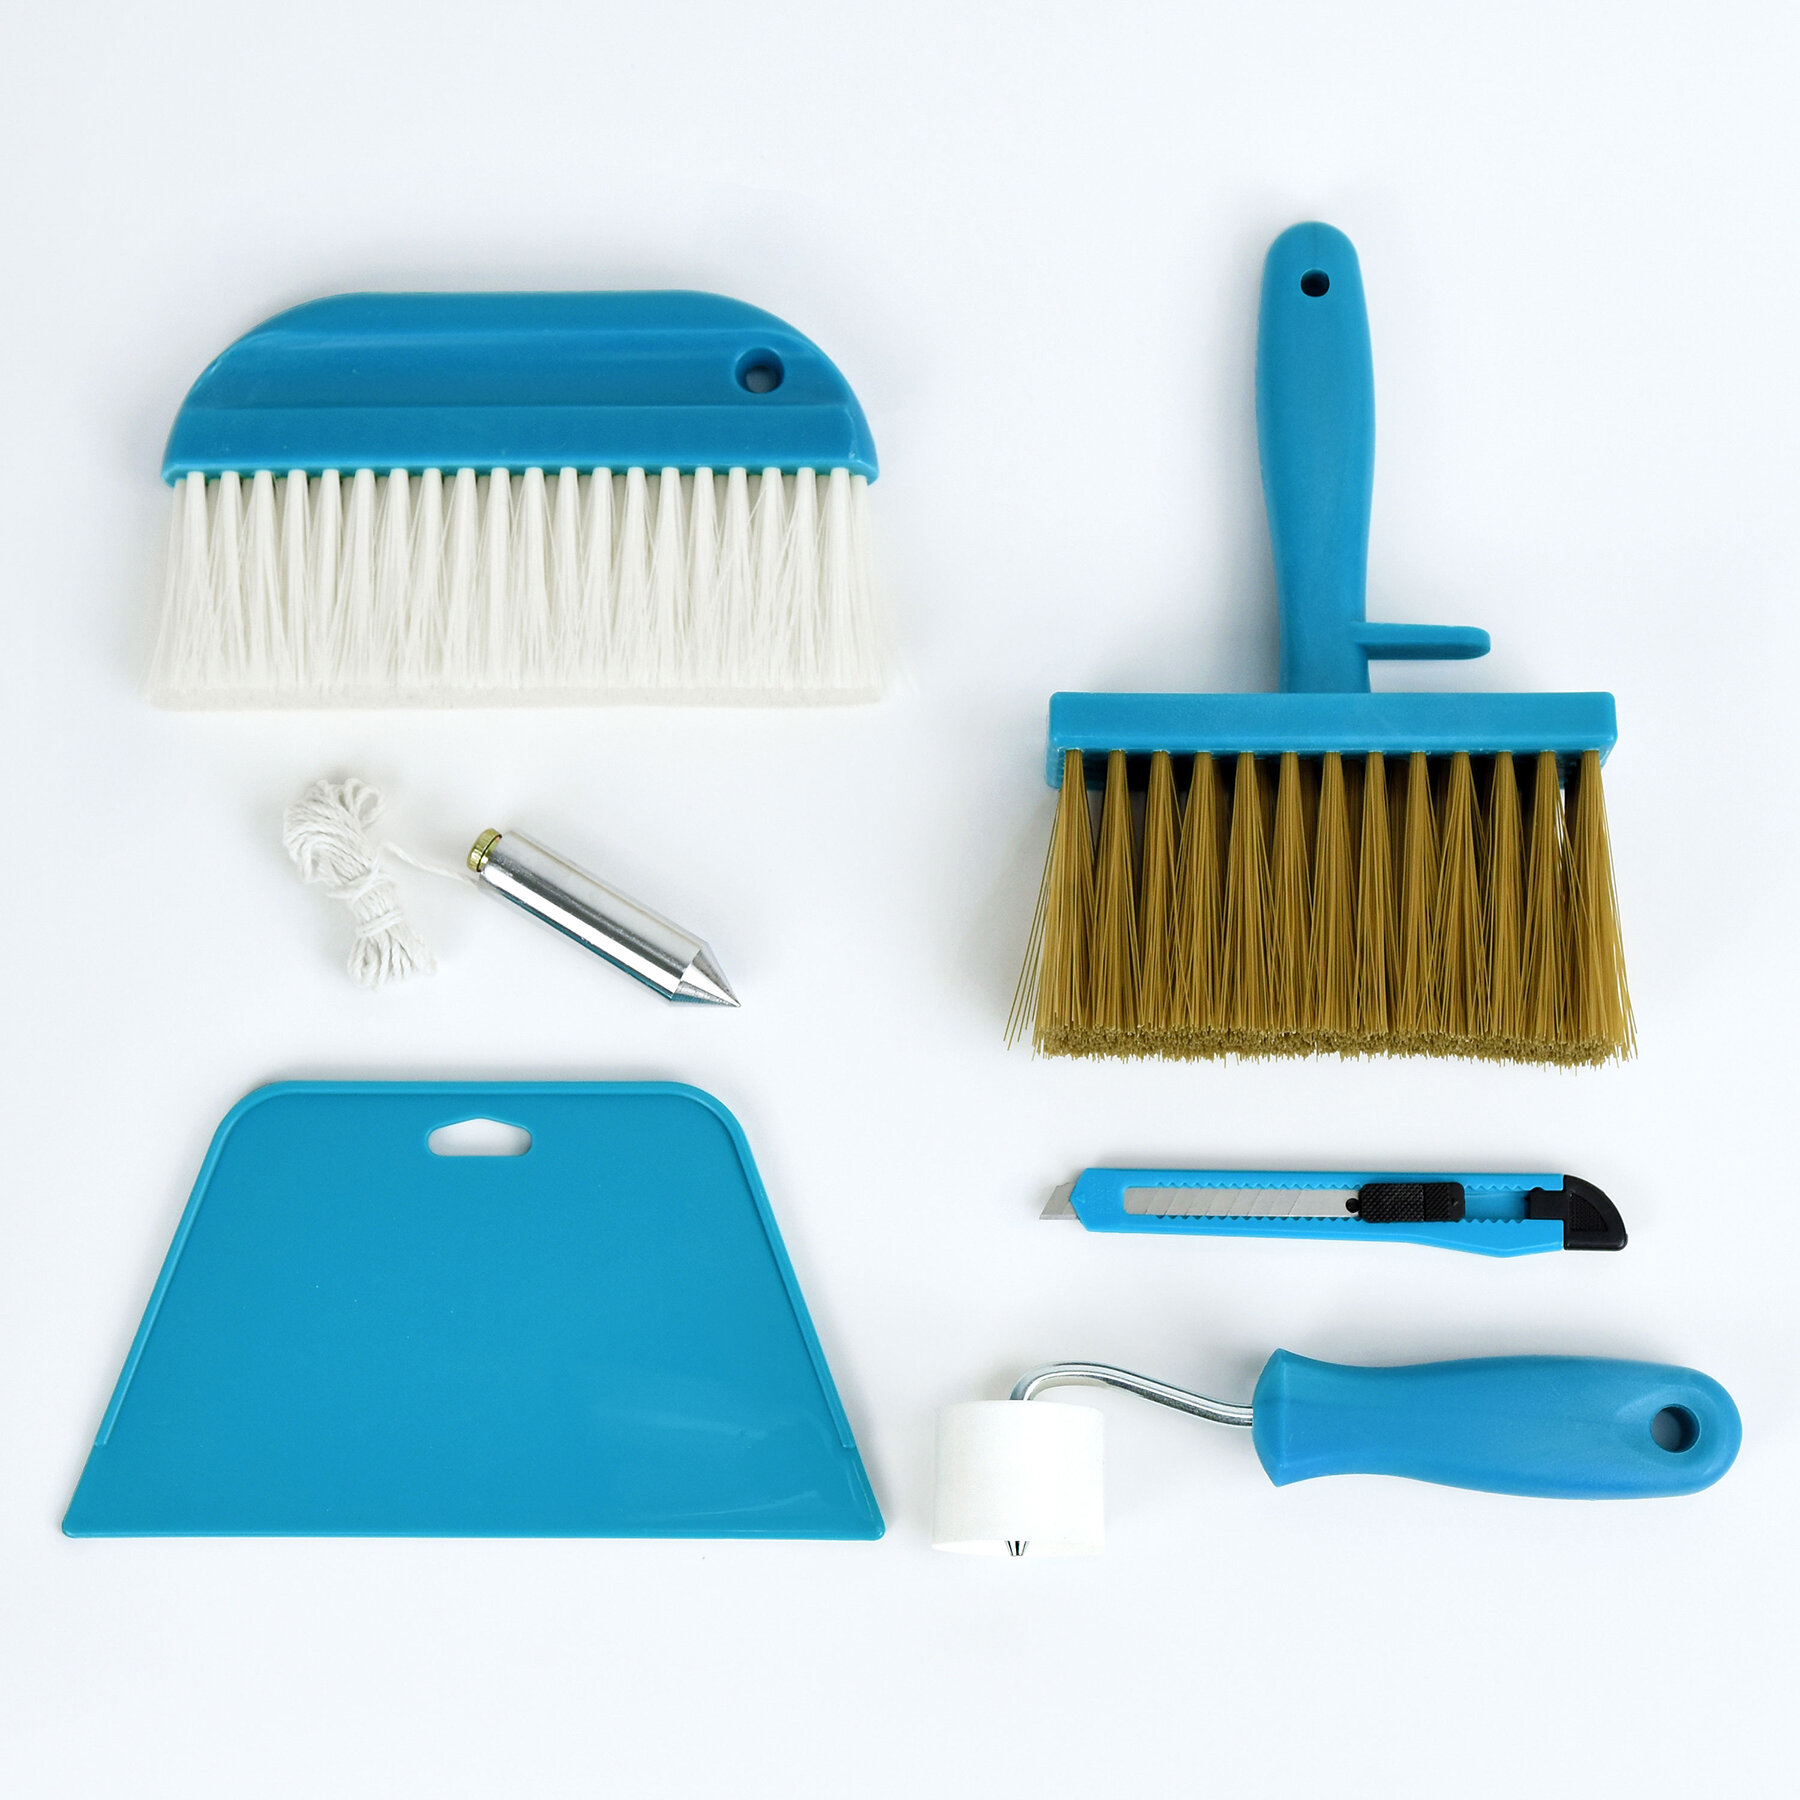 PWK) Wallpaper Kit w/New Clam Shell & Soft Grip Brushes » ALLWAY® The Tools  You Ask For By Name